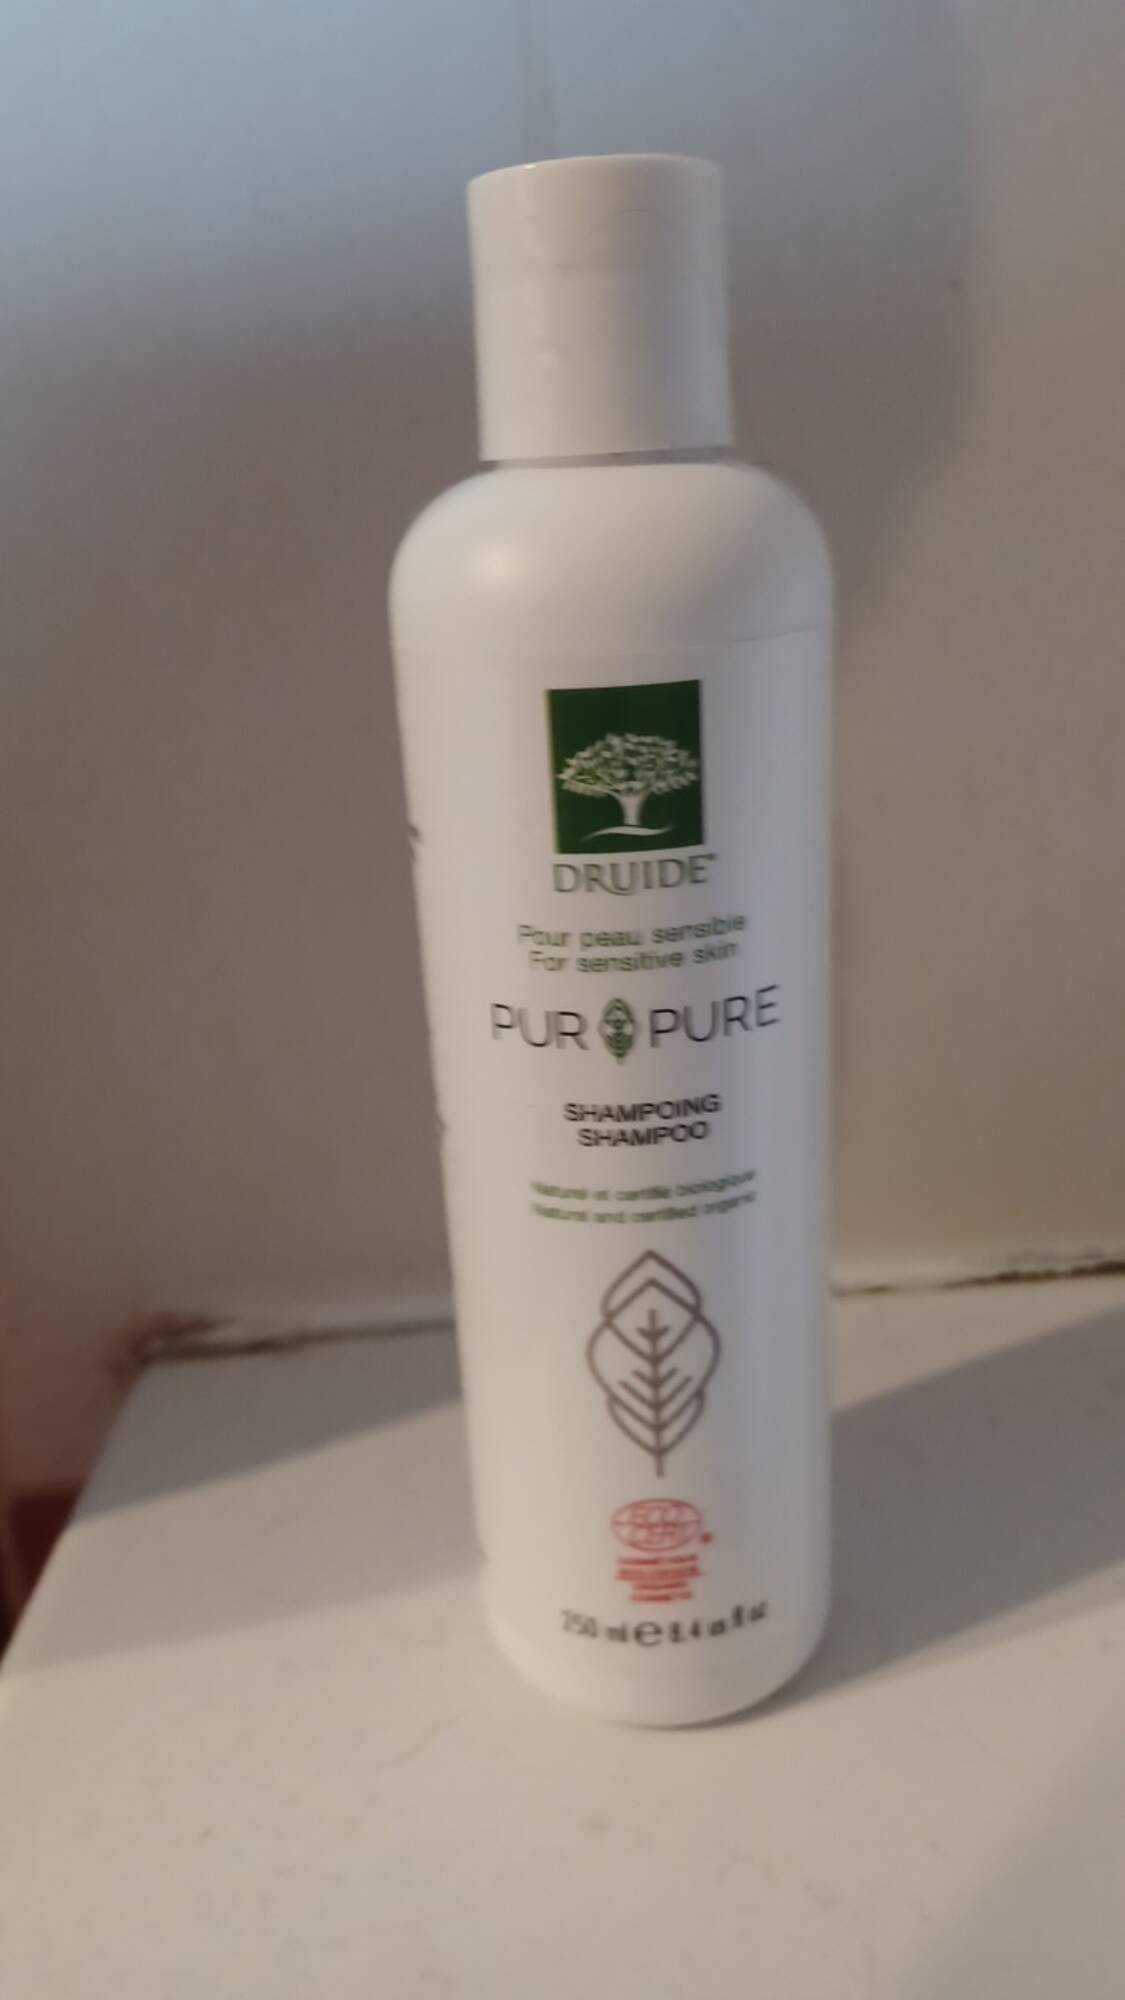 DRUIDE - Pur pure - Shampooing